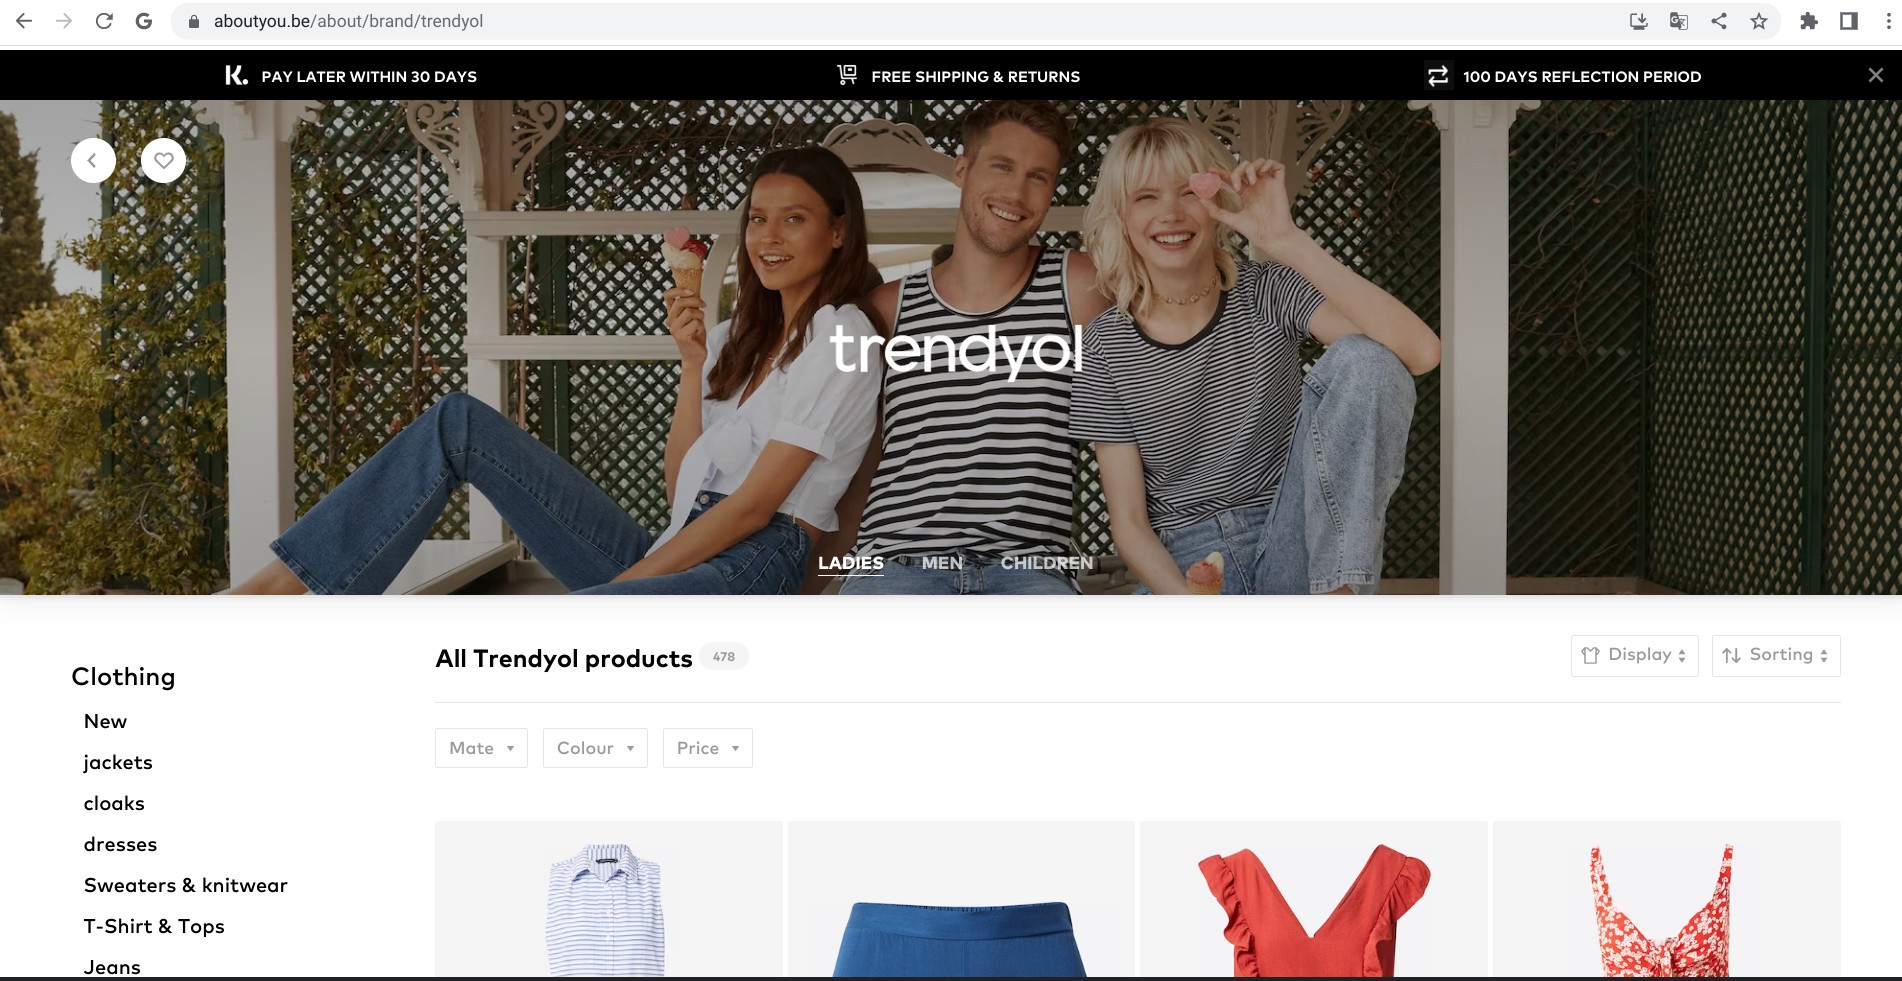 Screenshot of aboutyou.be displaying Trendyol’s brand page